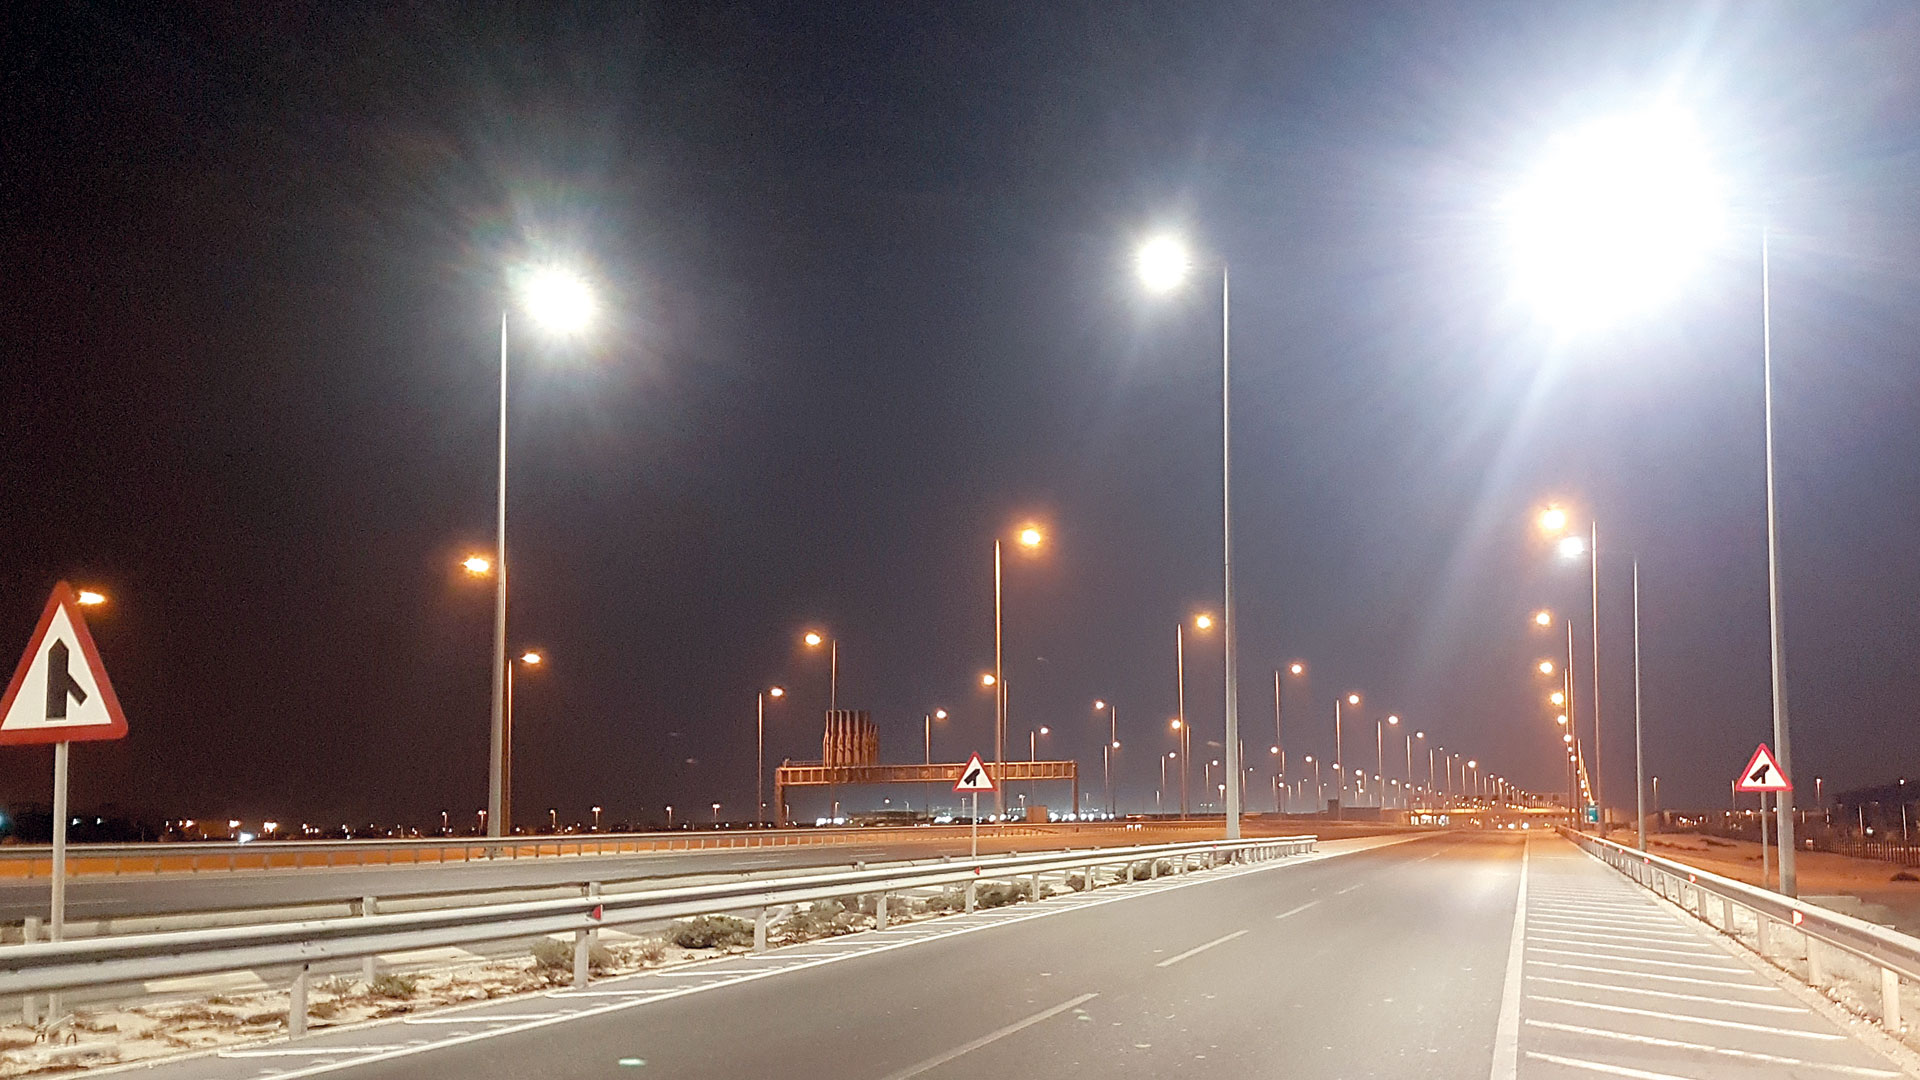 A Call to complete street lighting with LED